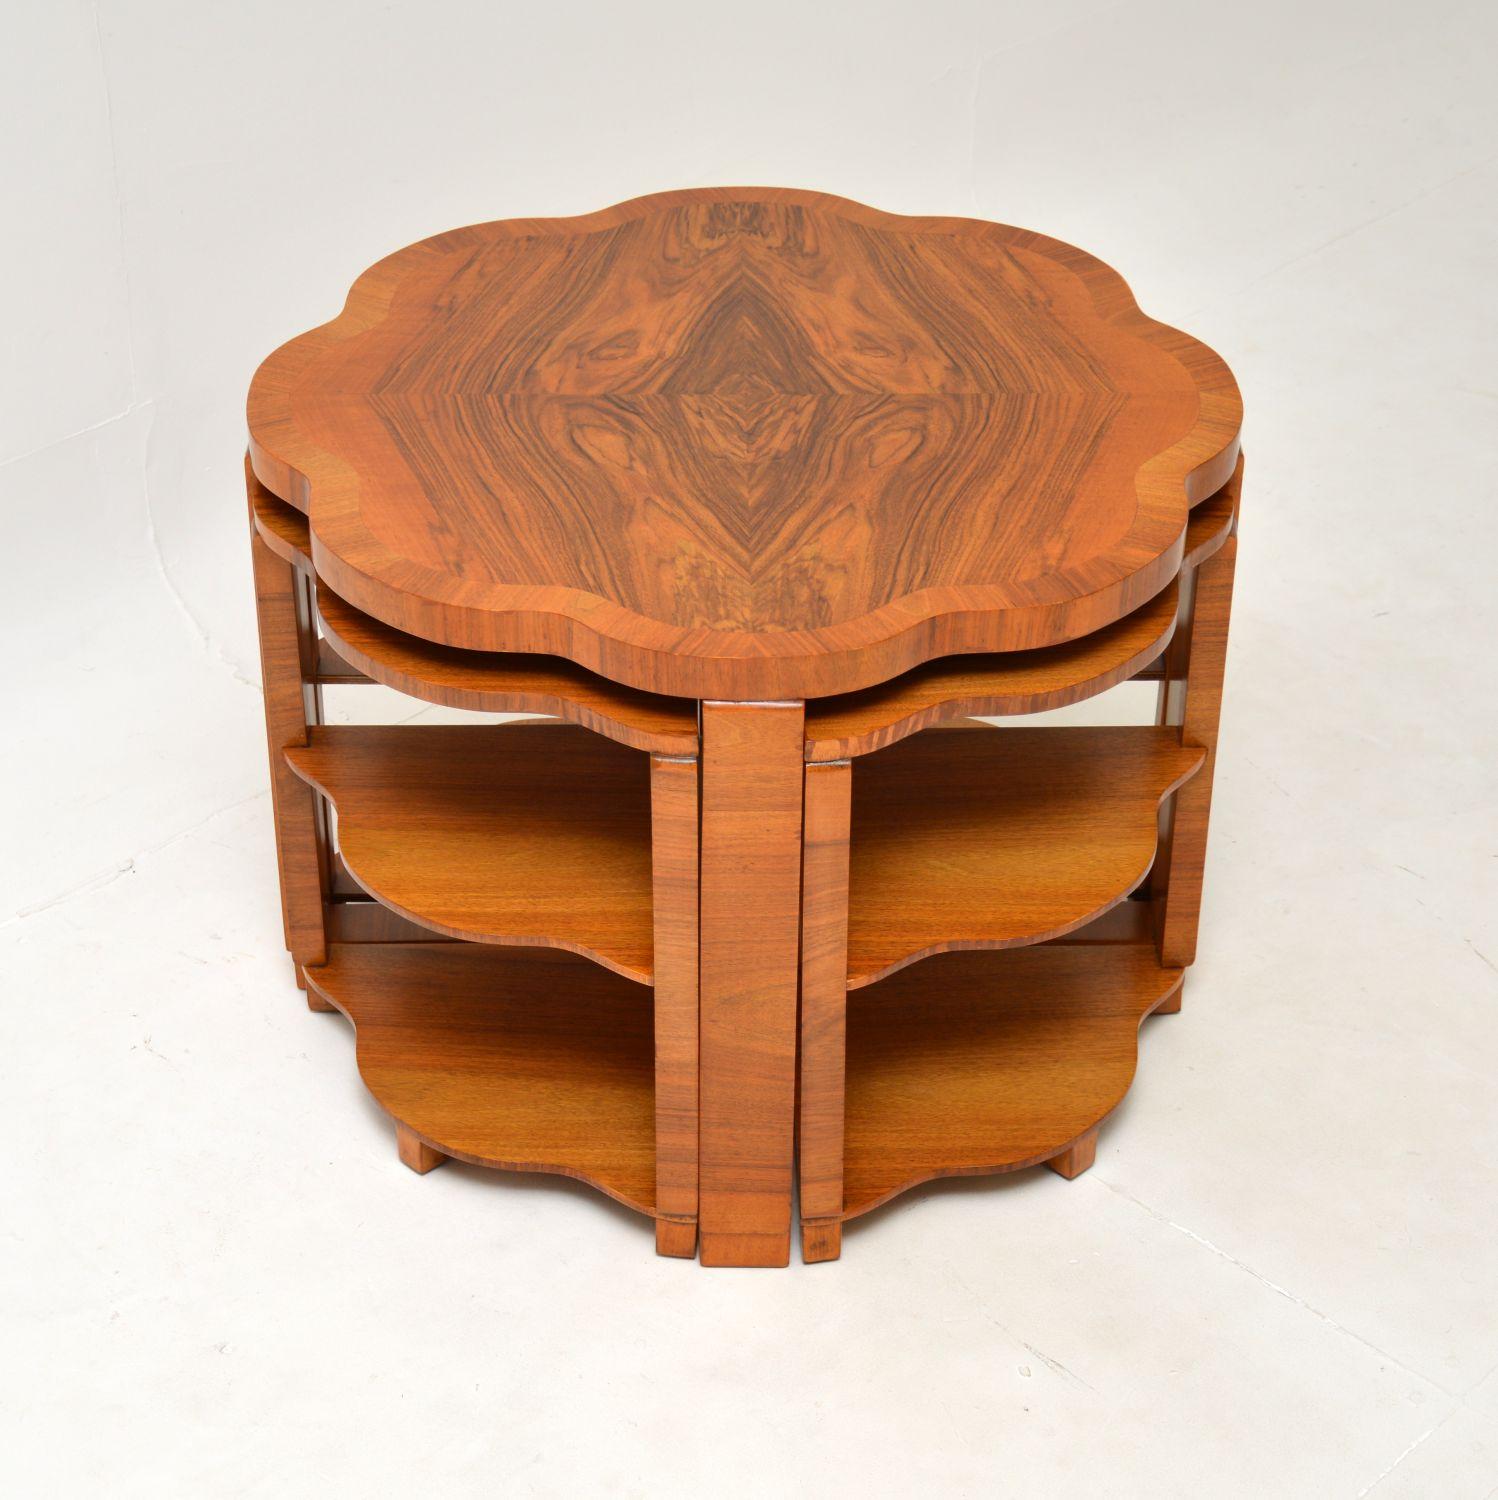 A fantastic Art Deco walnut nesting coffee table by Epstein. This was made in England by Harry & Lou Epstein, it dates from the 1930’s.

This is of superb quality, with a beautiful flower shaped top and thick edges. It has a very useful design, with